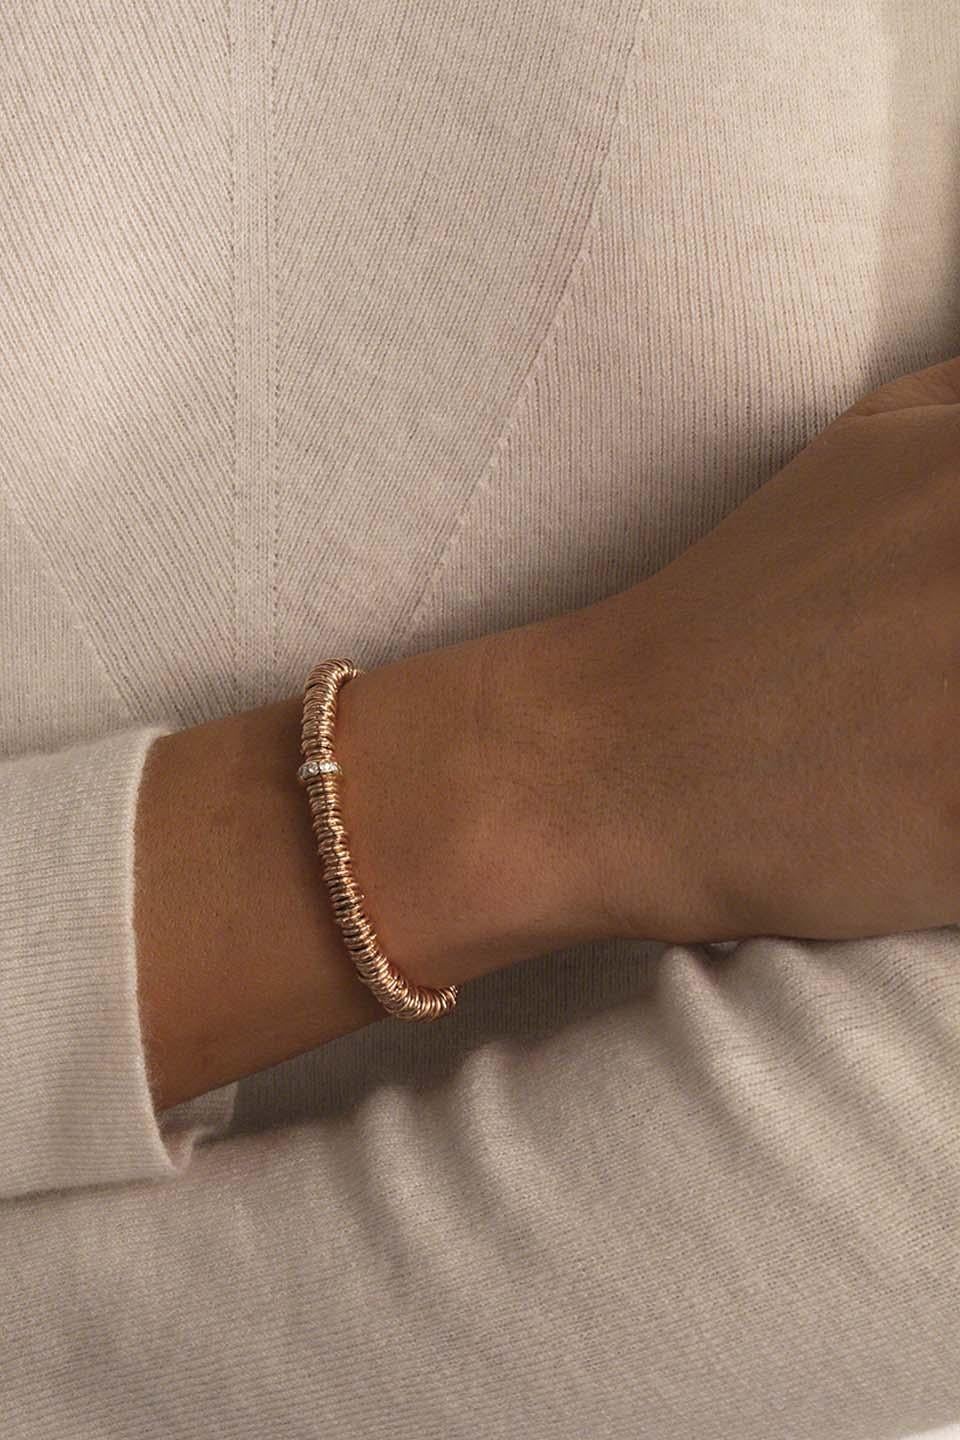 BabyBang Rosé MiniDiamonds / Rose Gold. Stretch silver rose gold bracelet with white diamonds (0,24 ct.) set in rose gold 18kt.

Practical. Attractive. Contemporary
The Bang collection, best-seller elastic bracelet for several years, is enriched by